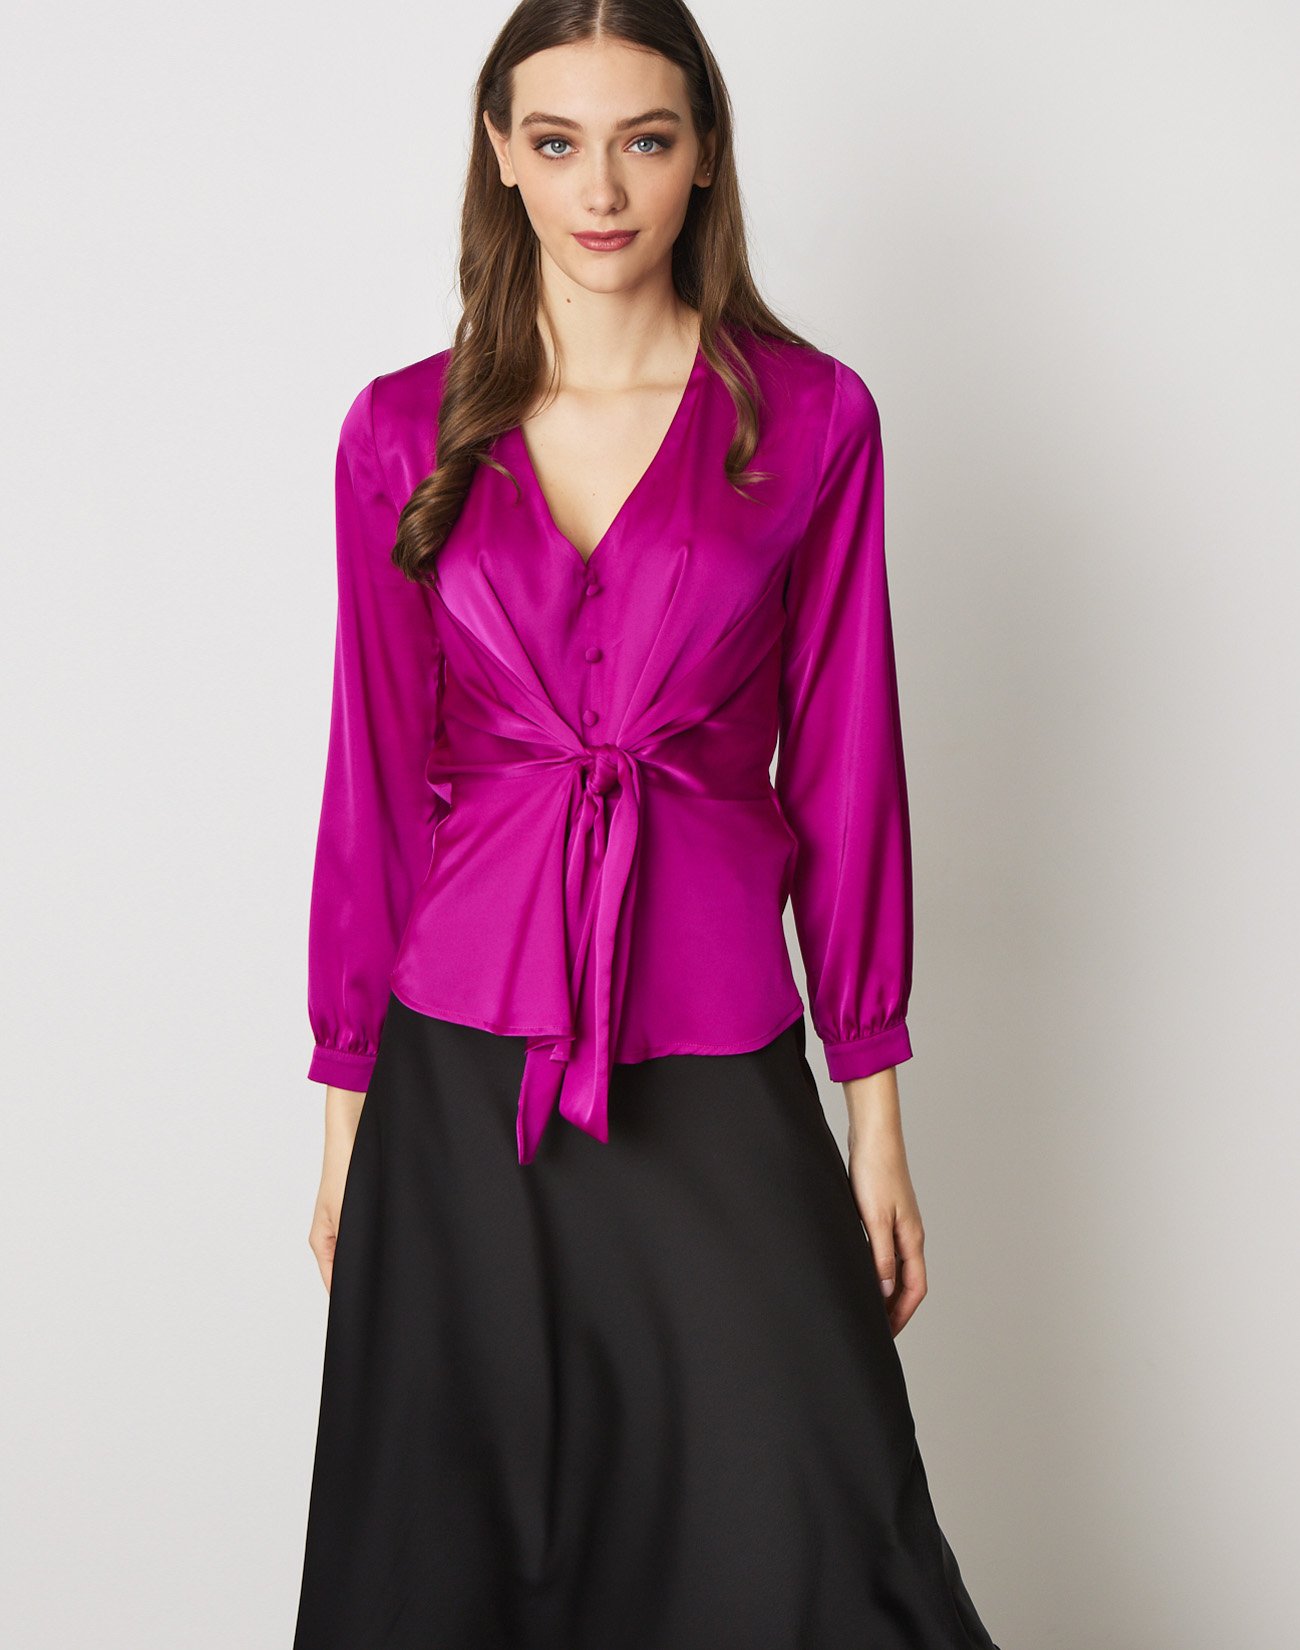 Satin top with knot